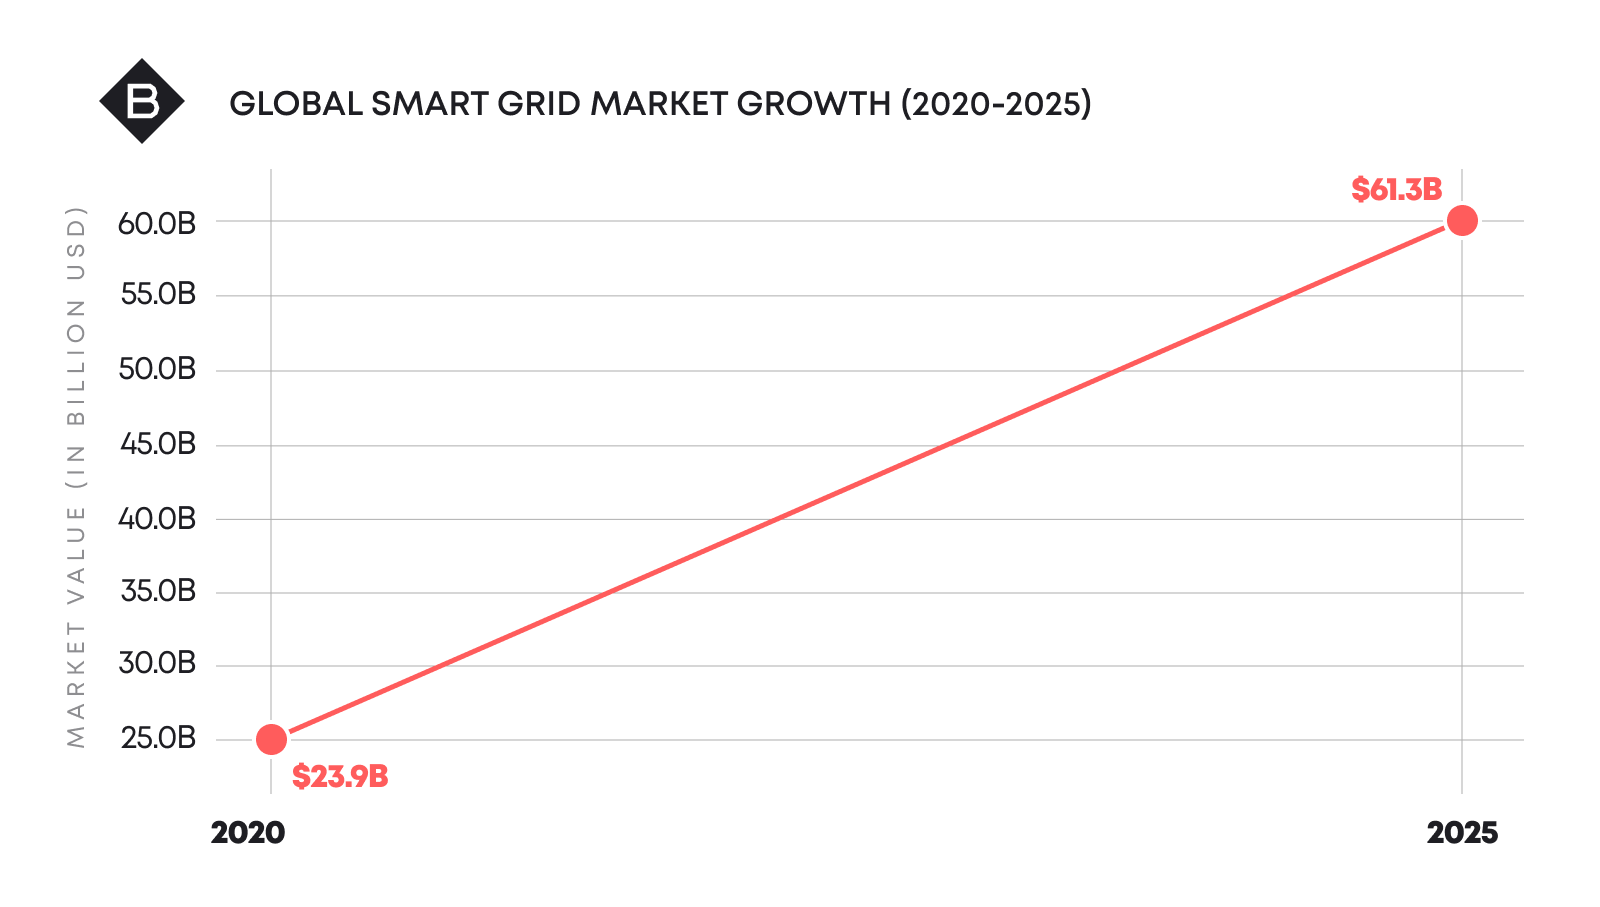 The global smart grid market is expected to grow from $23.8 billion in 2020 to $61.3 billion by 2025